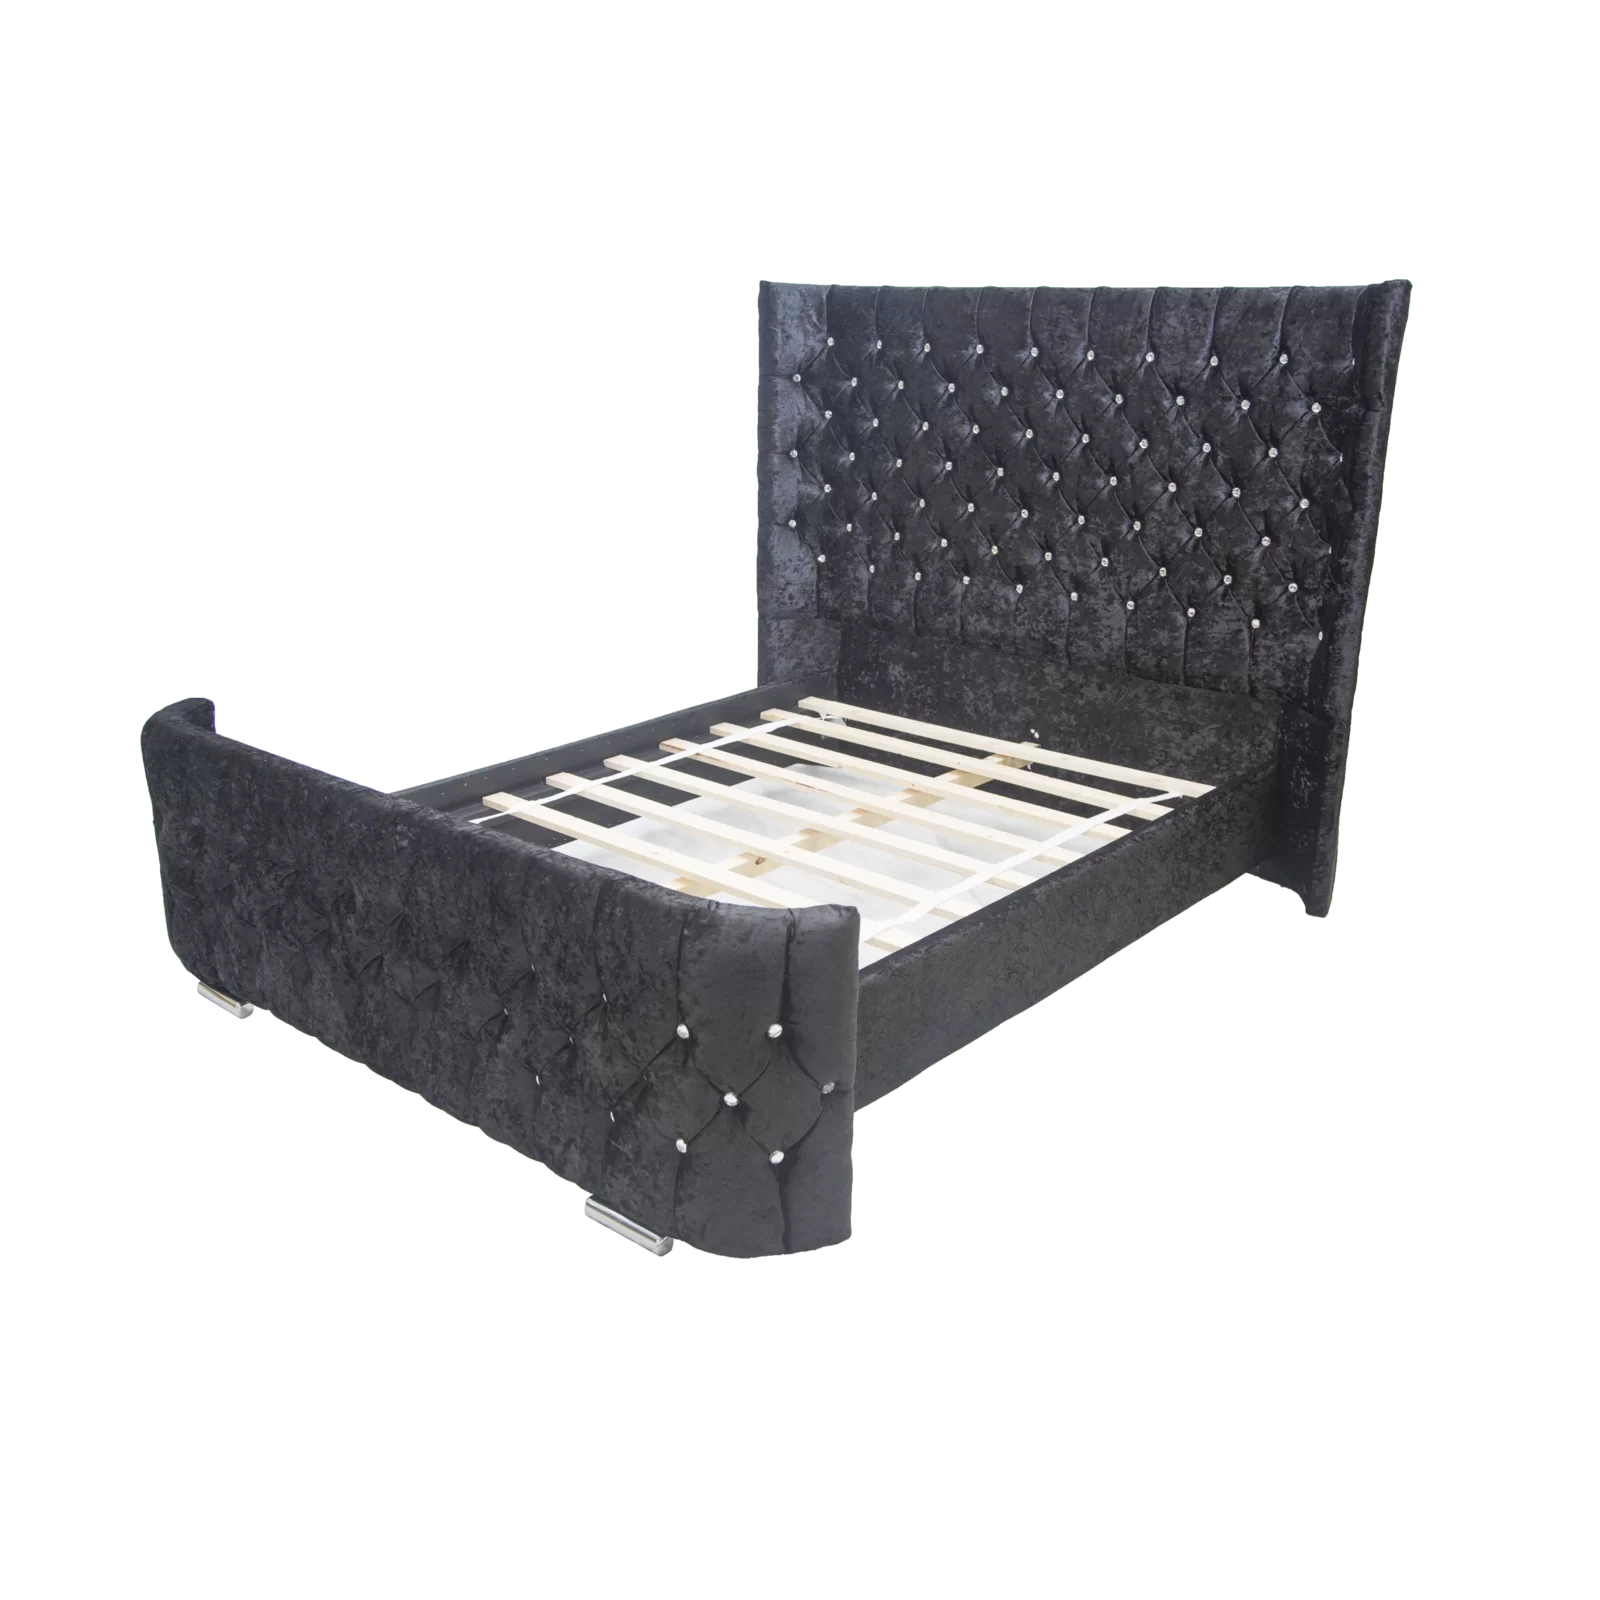 Grammy Steel Plush Fabric Wing back Bed Frame